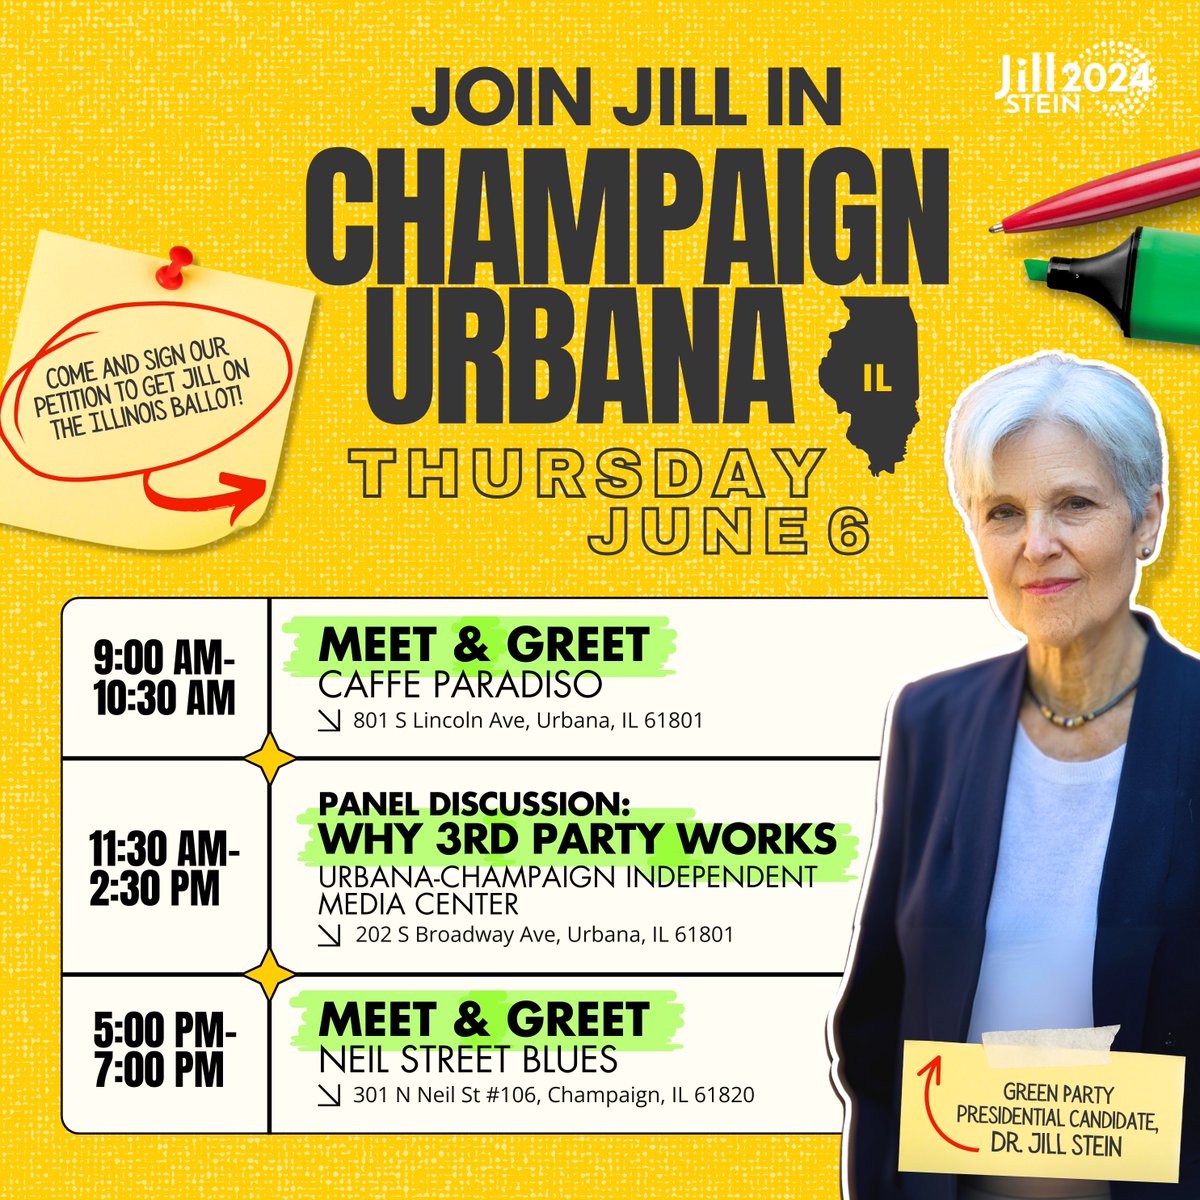 We've got THREE public events in Champaign-Urbana! Join us in Illinois this Thursday and learn about the only real choice on the ballot for a just economy for working people, an end to endless war and genocide, and a livable future for our children! RSVP: jillstein2024.com/champaignurbana